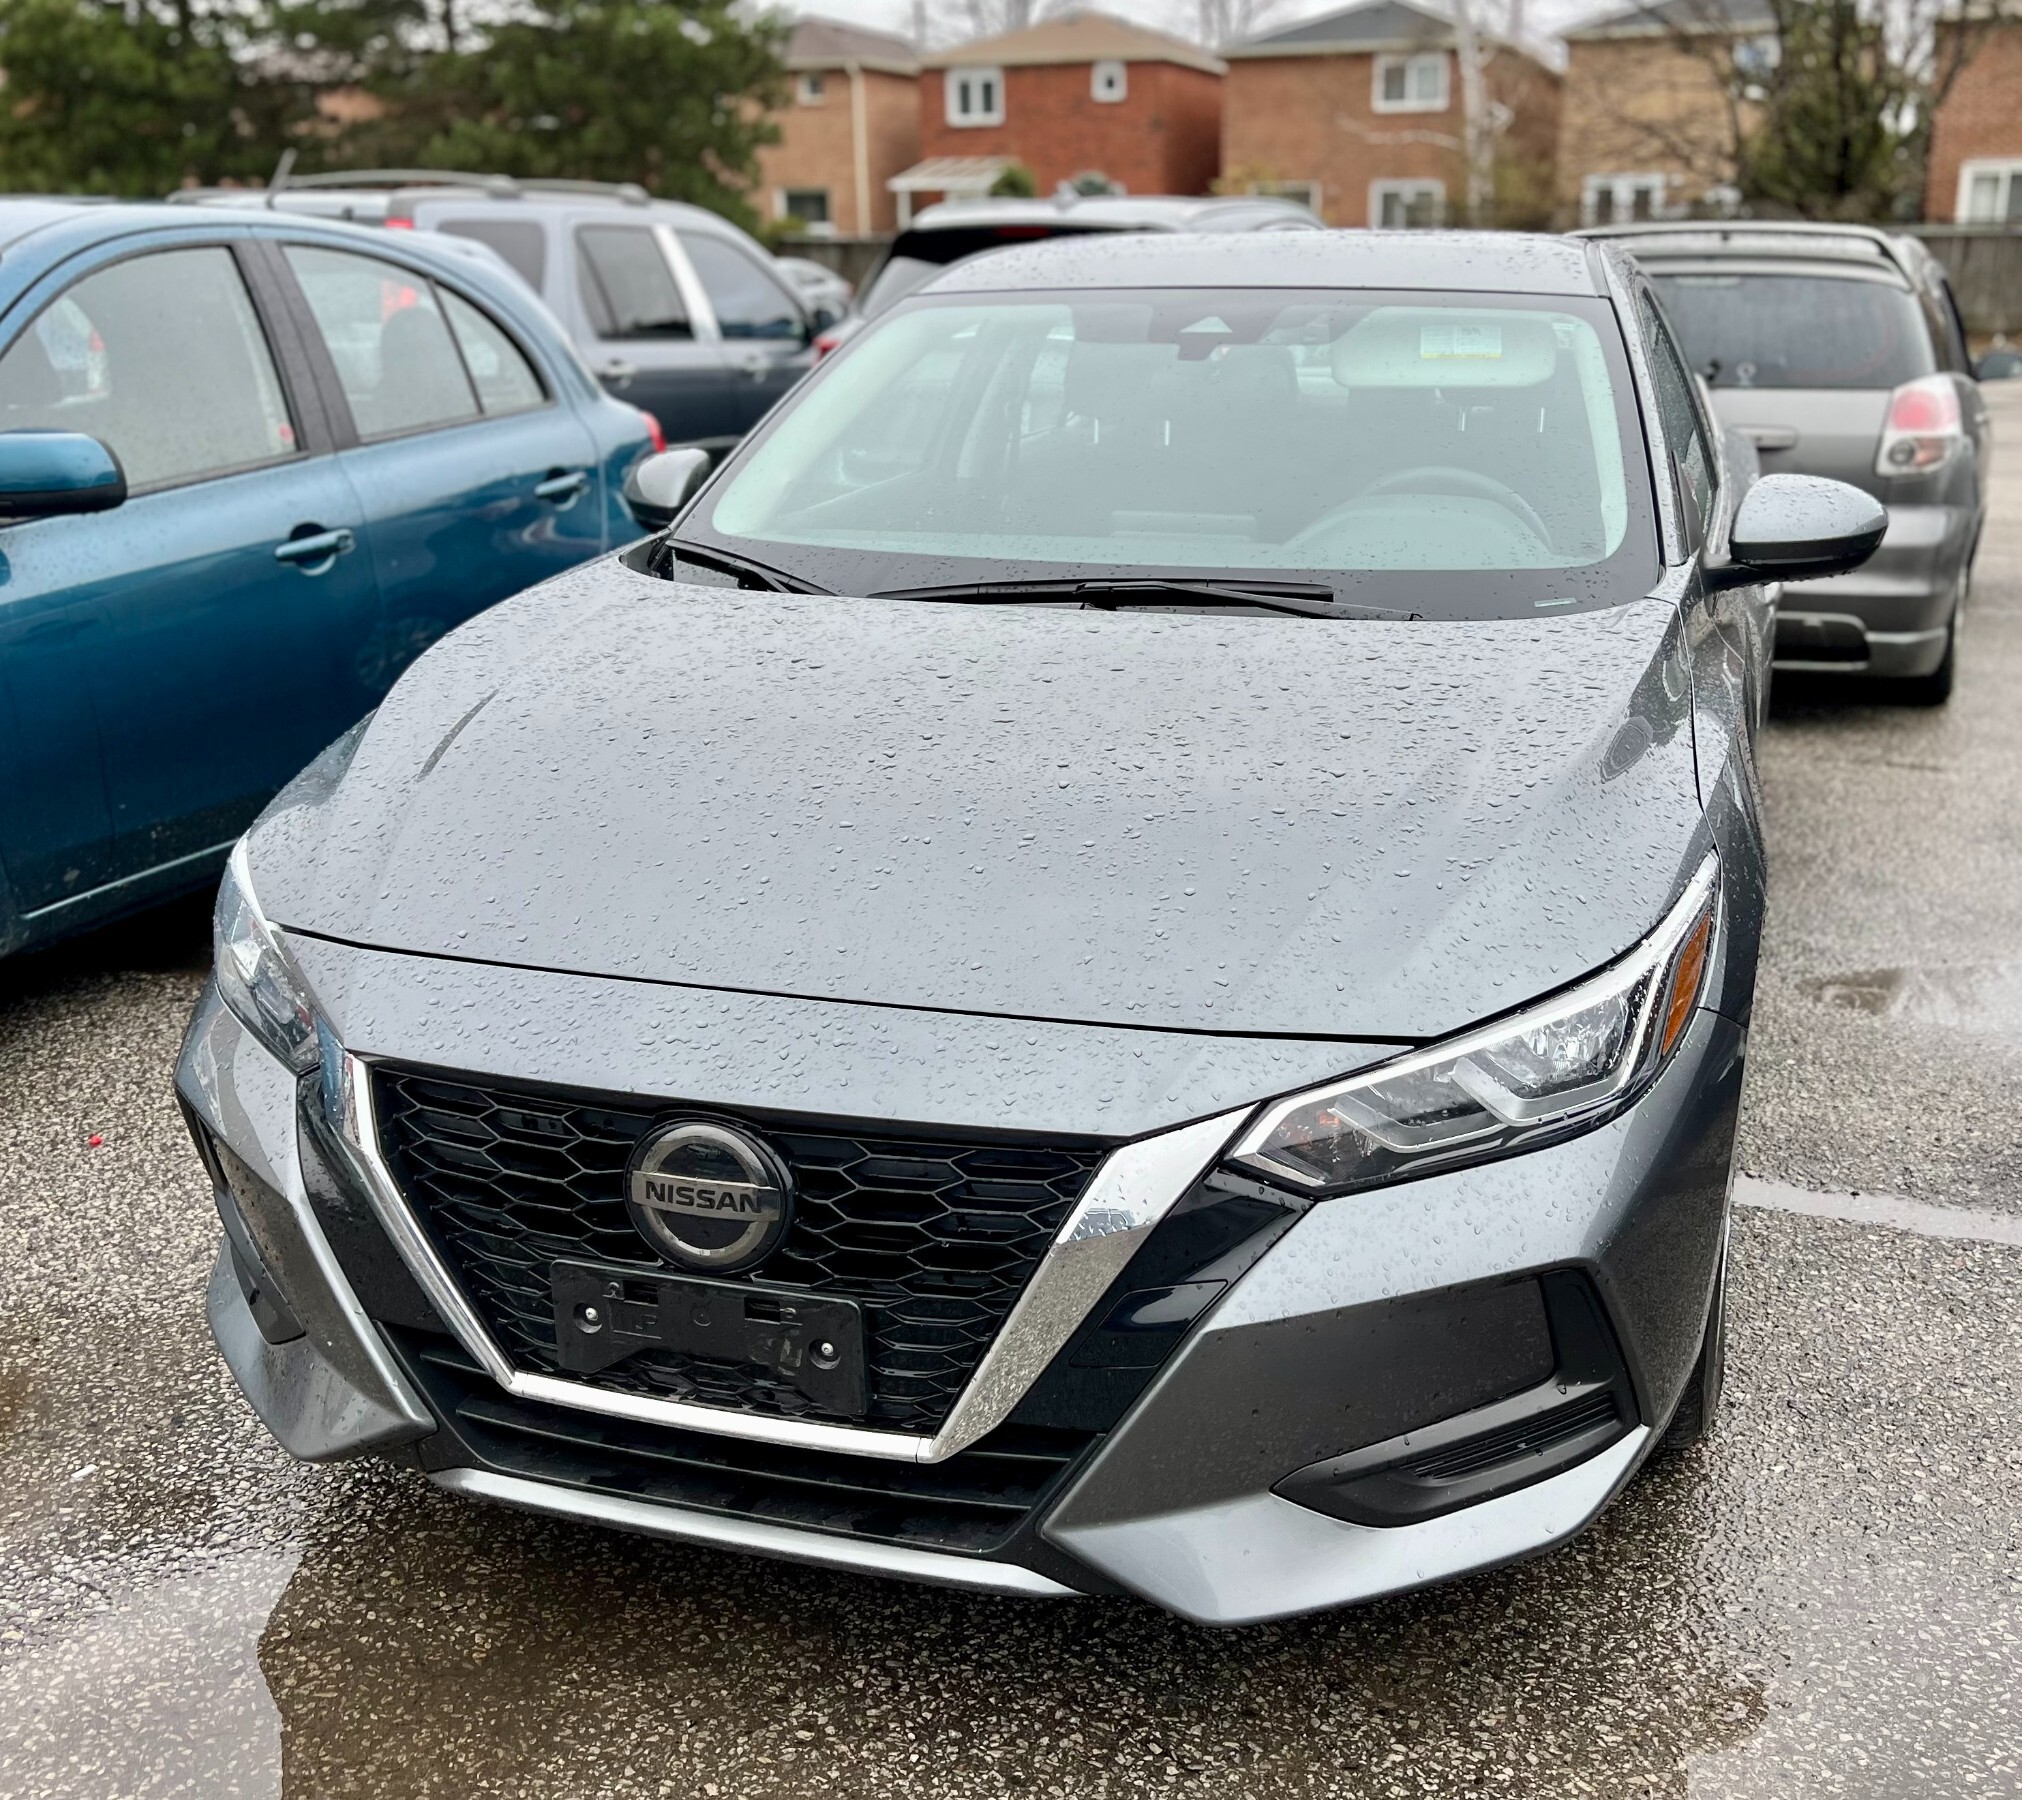 2022 Nissan Sentra S Plus - SALE EVENT MAY 24- MAY 25